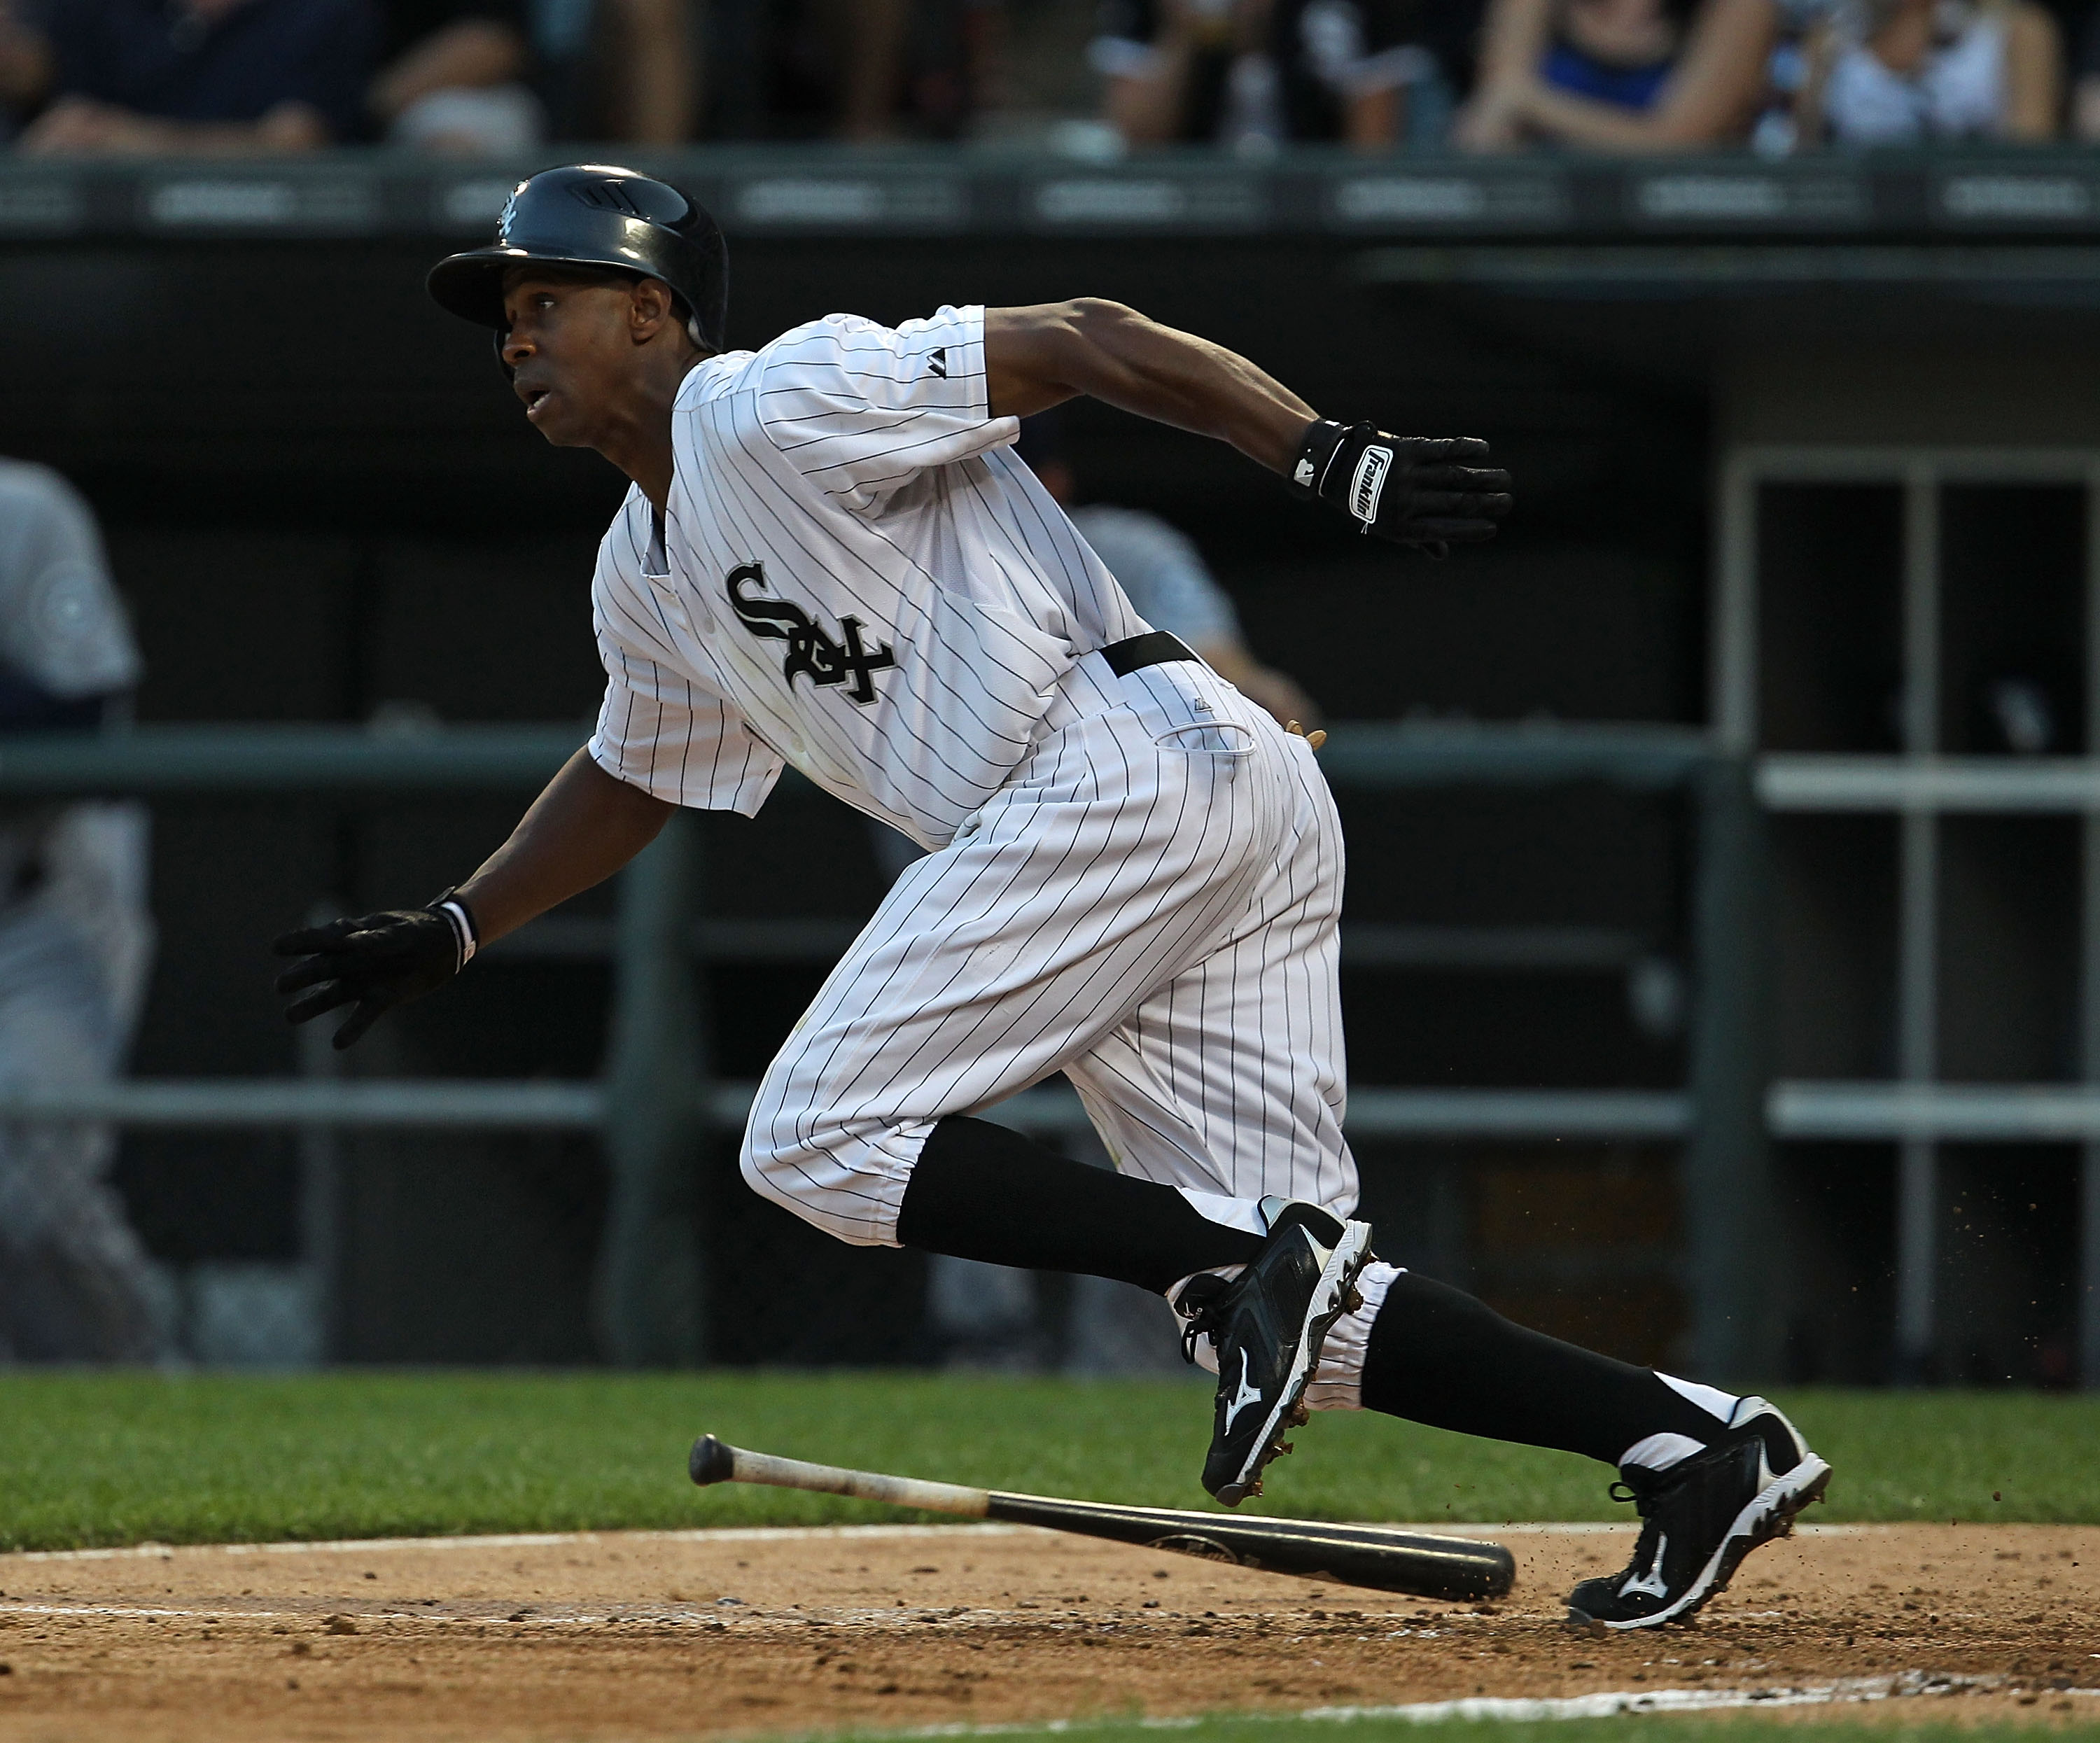 CHICAGO - JULY 26: Juan Pierre #1 of the Chicago White Sox runs after hitting the ball against the Seattle Mariners at U.S. Cellular Field on July 26, 2010 in Chicago, Illinois. The White Sox defeated the Mariners 6-1. (Photo by Jonathan Daniel/Getty Imag